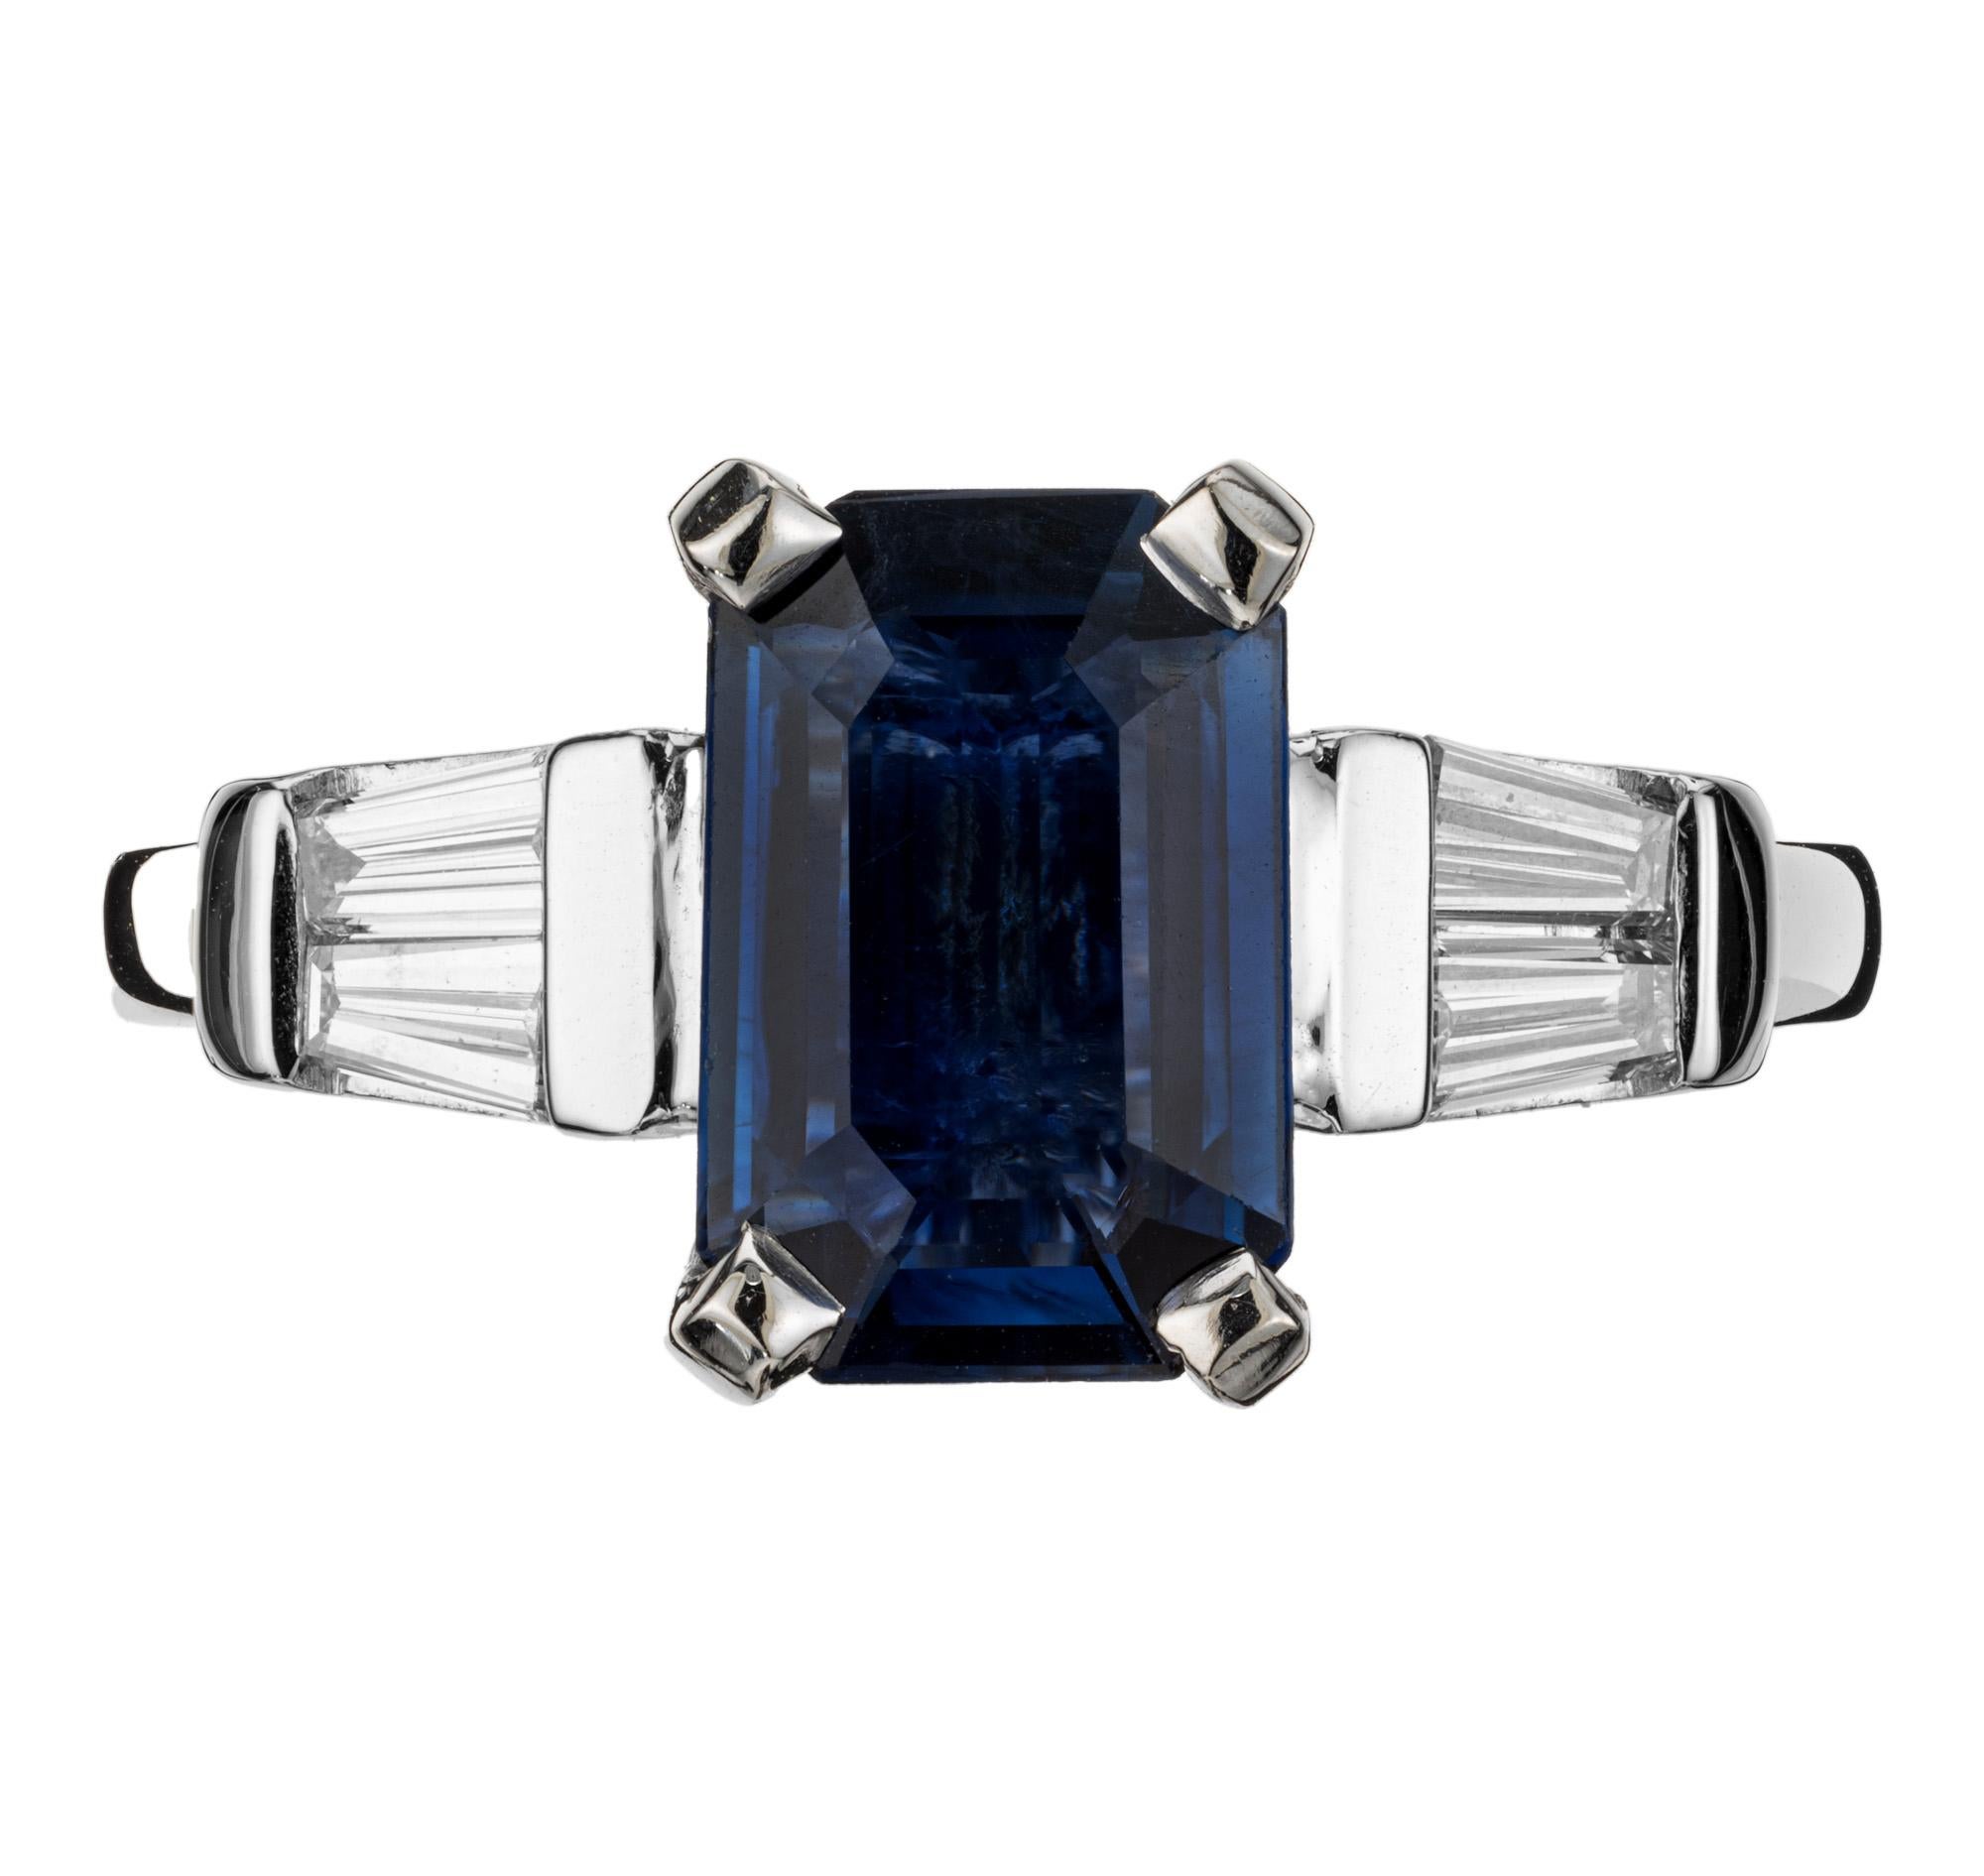 Sapphire and diamond engagement ring. Deep rich blue octagonal 2.09ct sapphire center stone, mounted in a platinum three-stone setting with two tapered baguettes on each side. The GIA has certified its as natural, no heat. Designed and crafted in